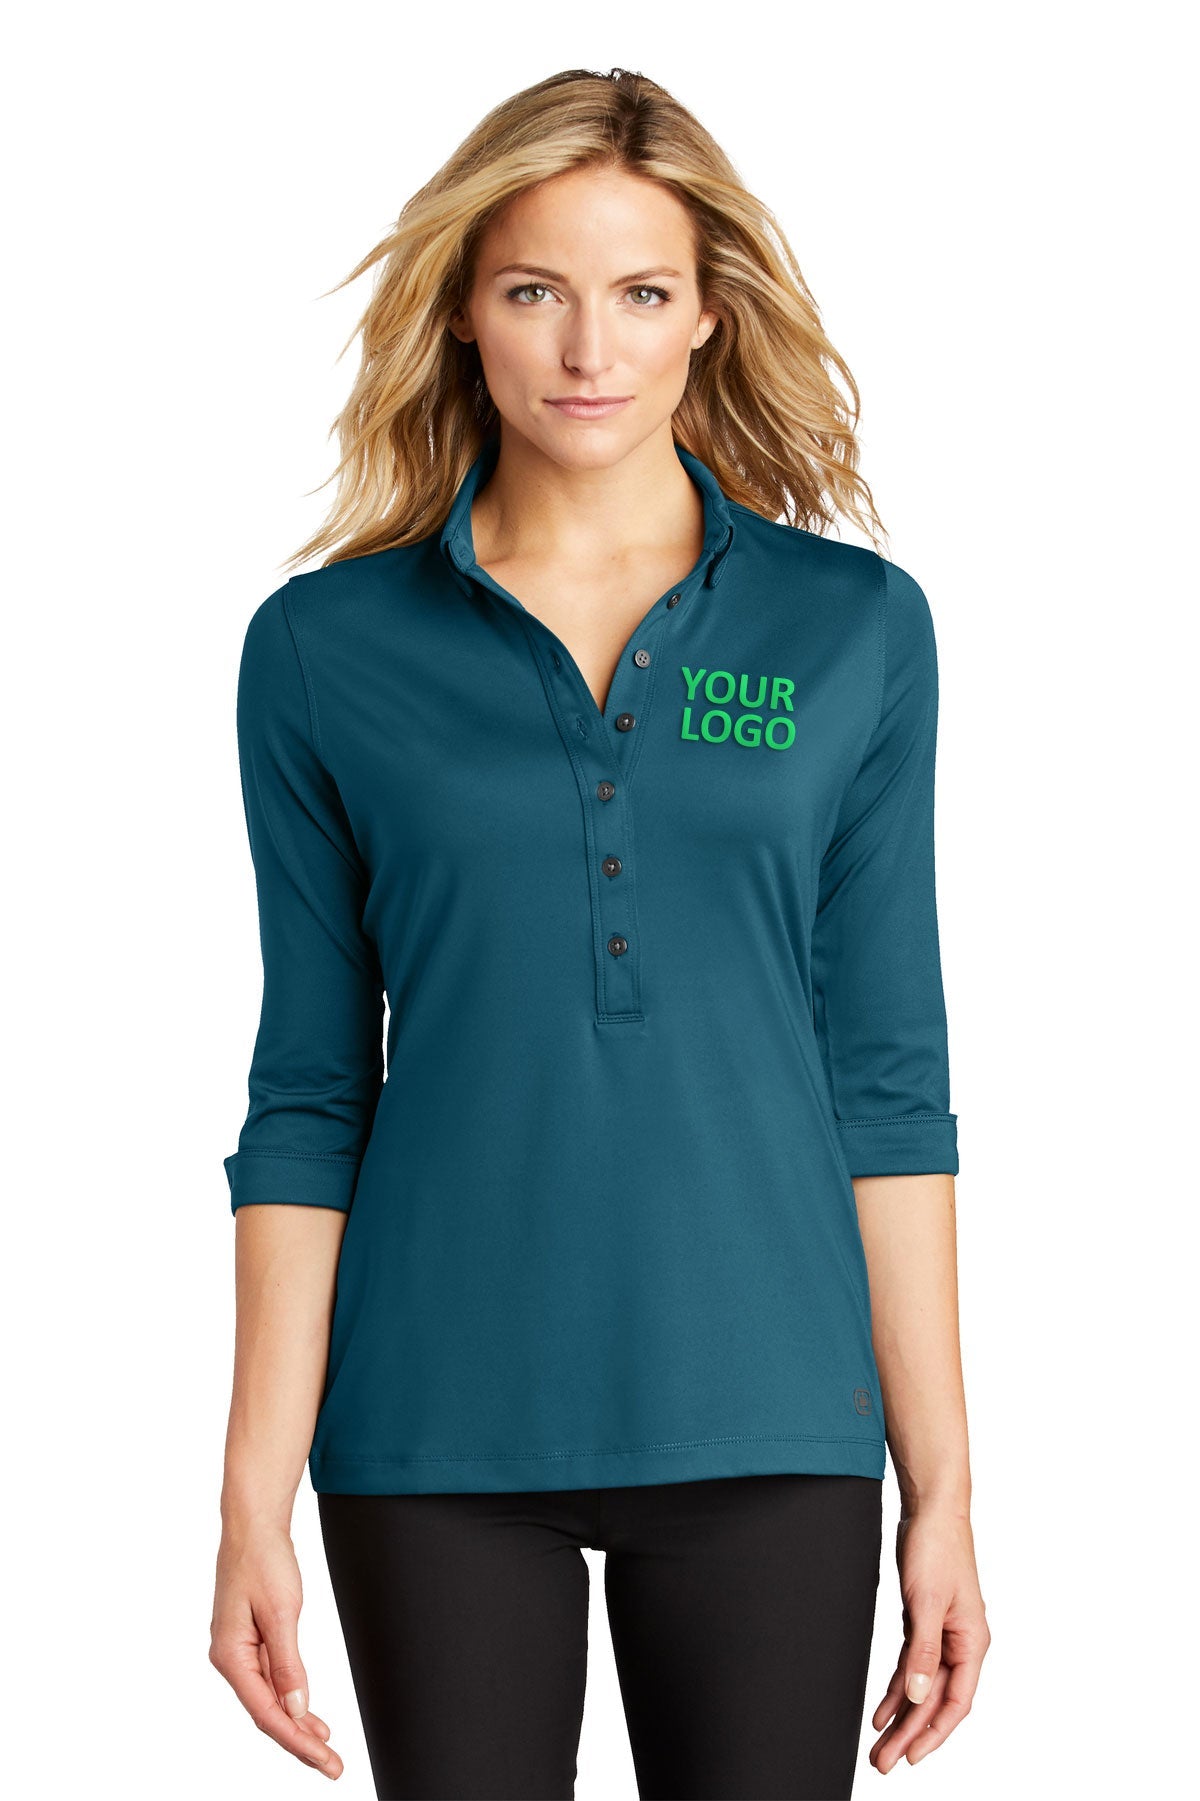 OGIO Teal Throttle LOG122 corporate polo shirts with logo